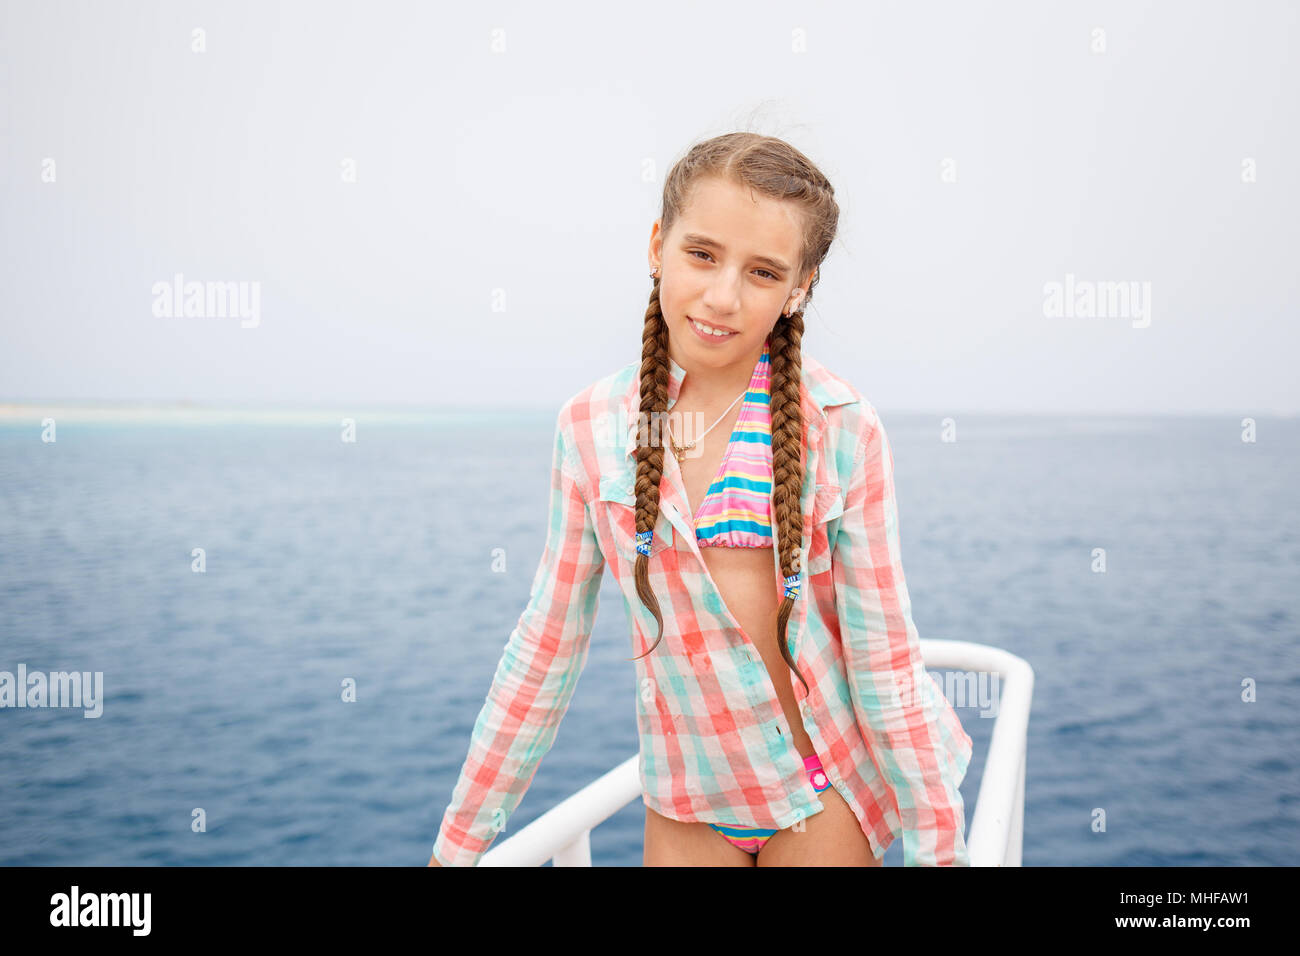 Young girl enjoying summer vacation on sea. Happy girl on yacht cruise. Vintage image with copy space Stock Photo